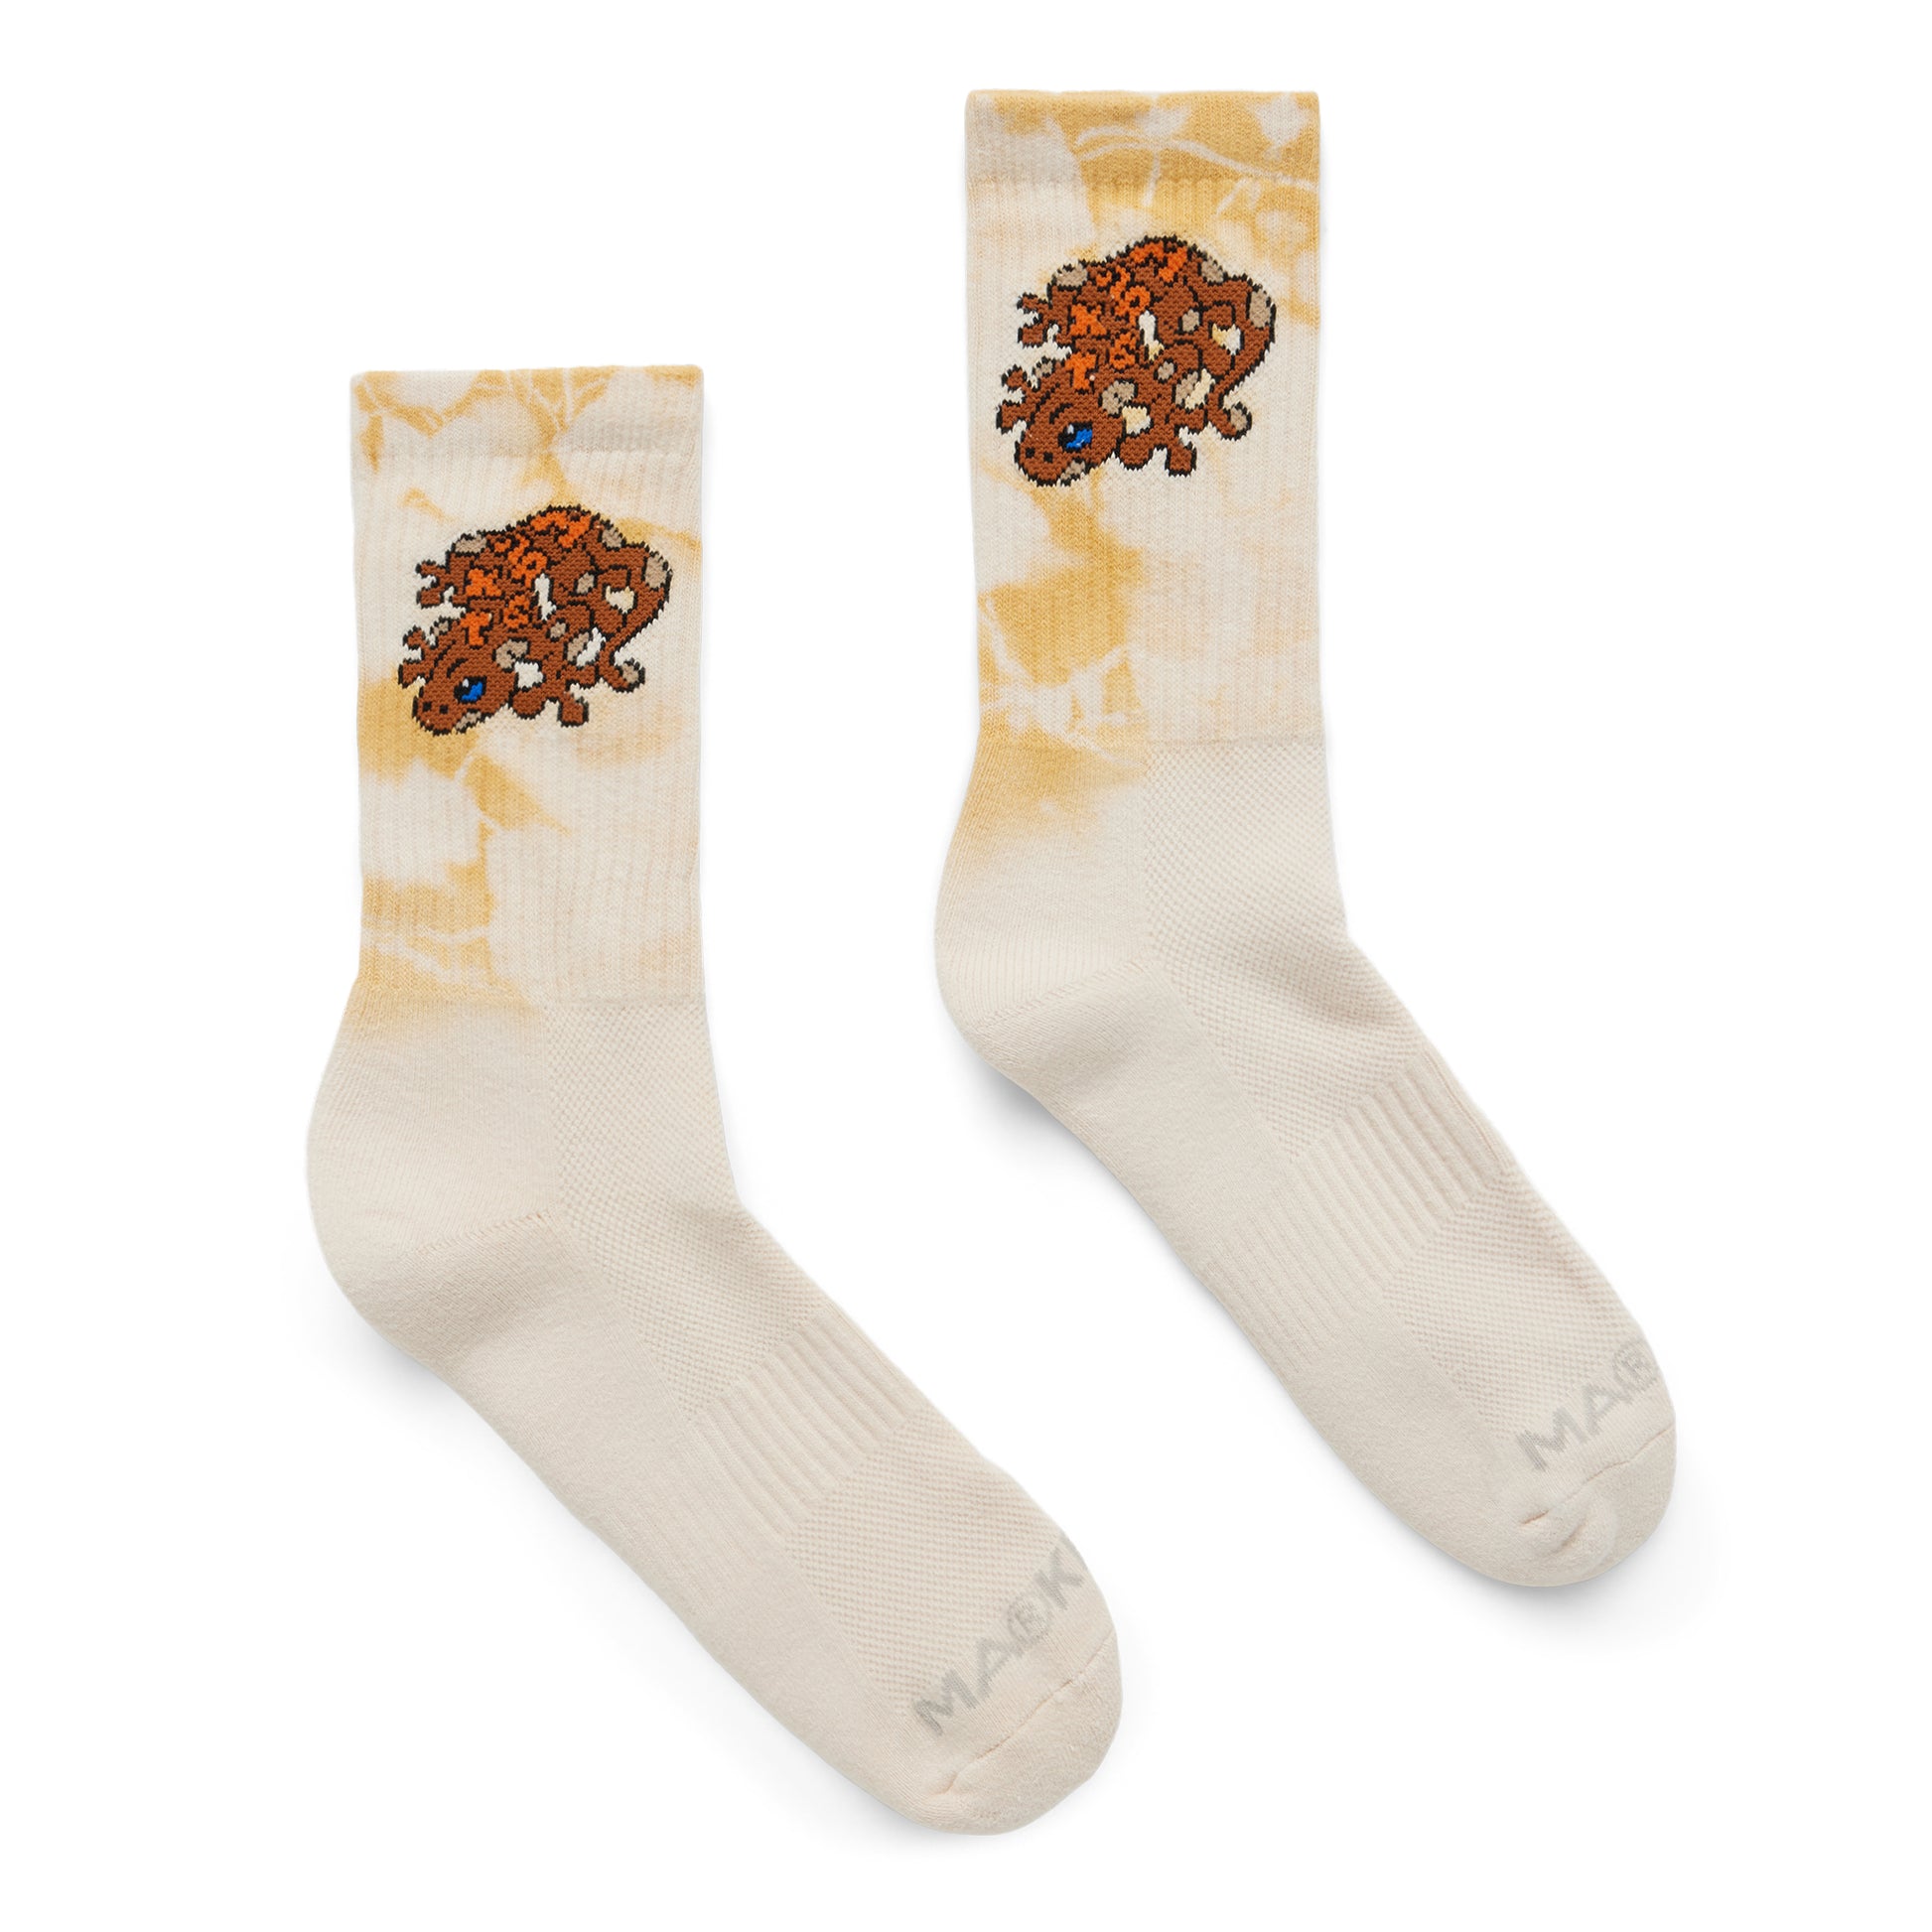 MARKET clothing brand LIZARD TIE DYE SOCKS. Find more graphic tees, socks, hats and small goods at MarketStudios.com. Formally Chinatown Market. 